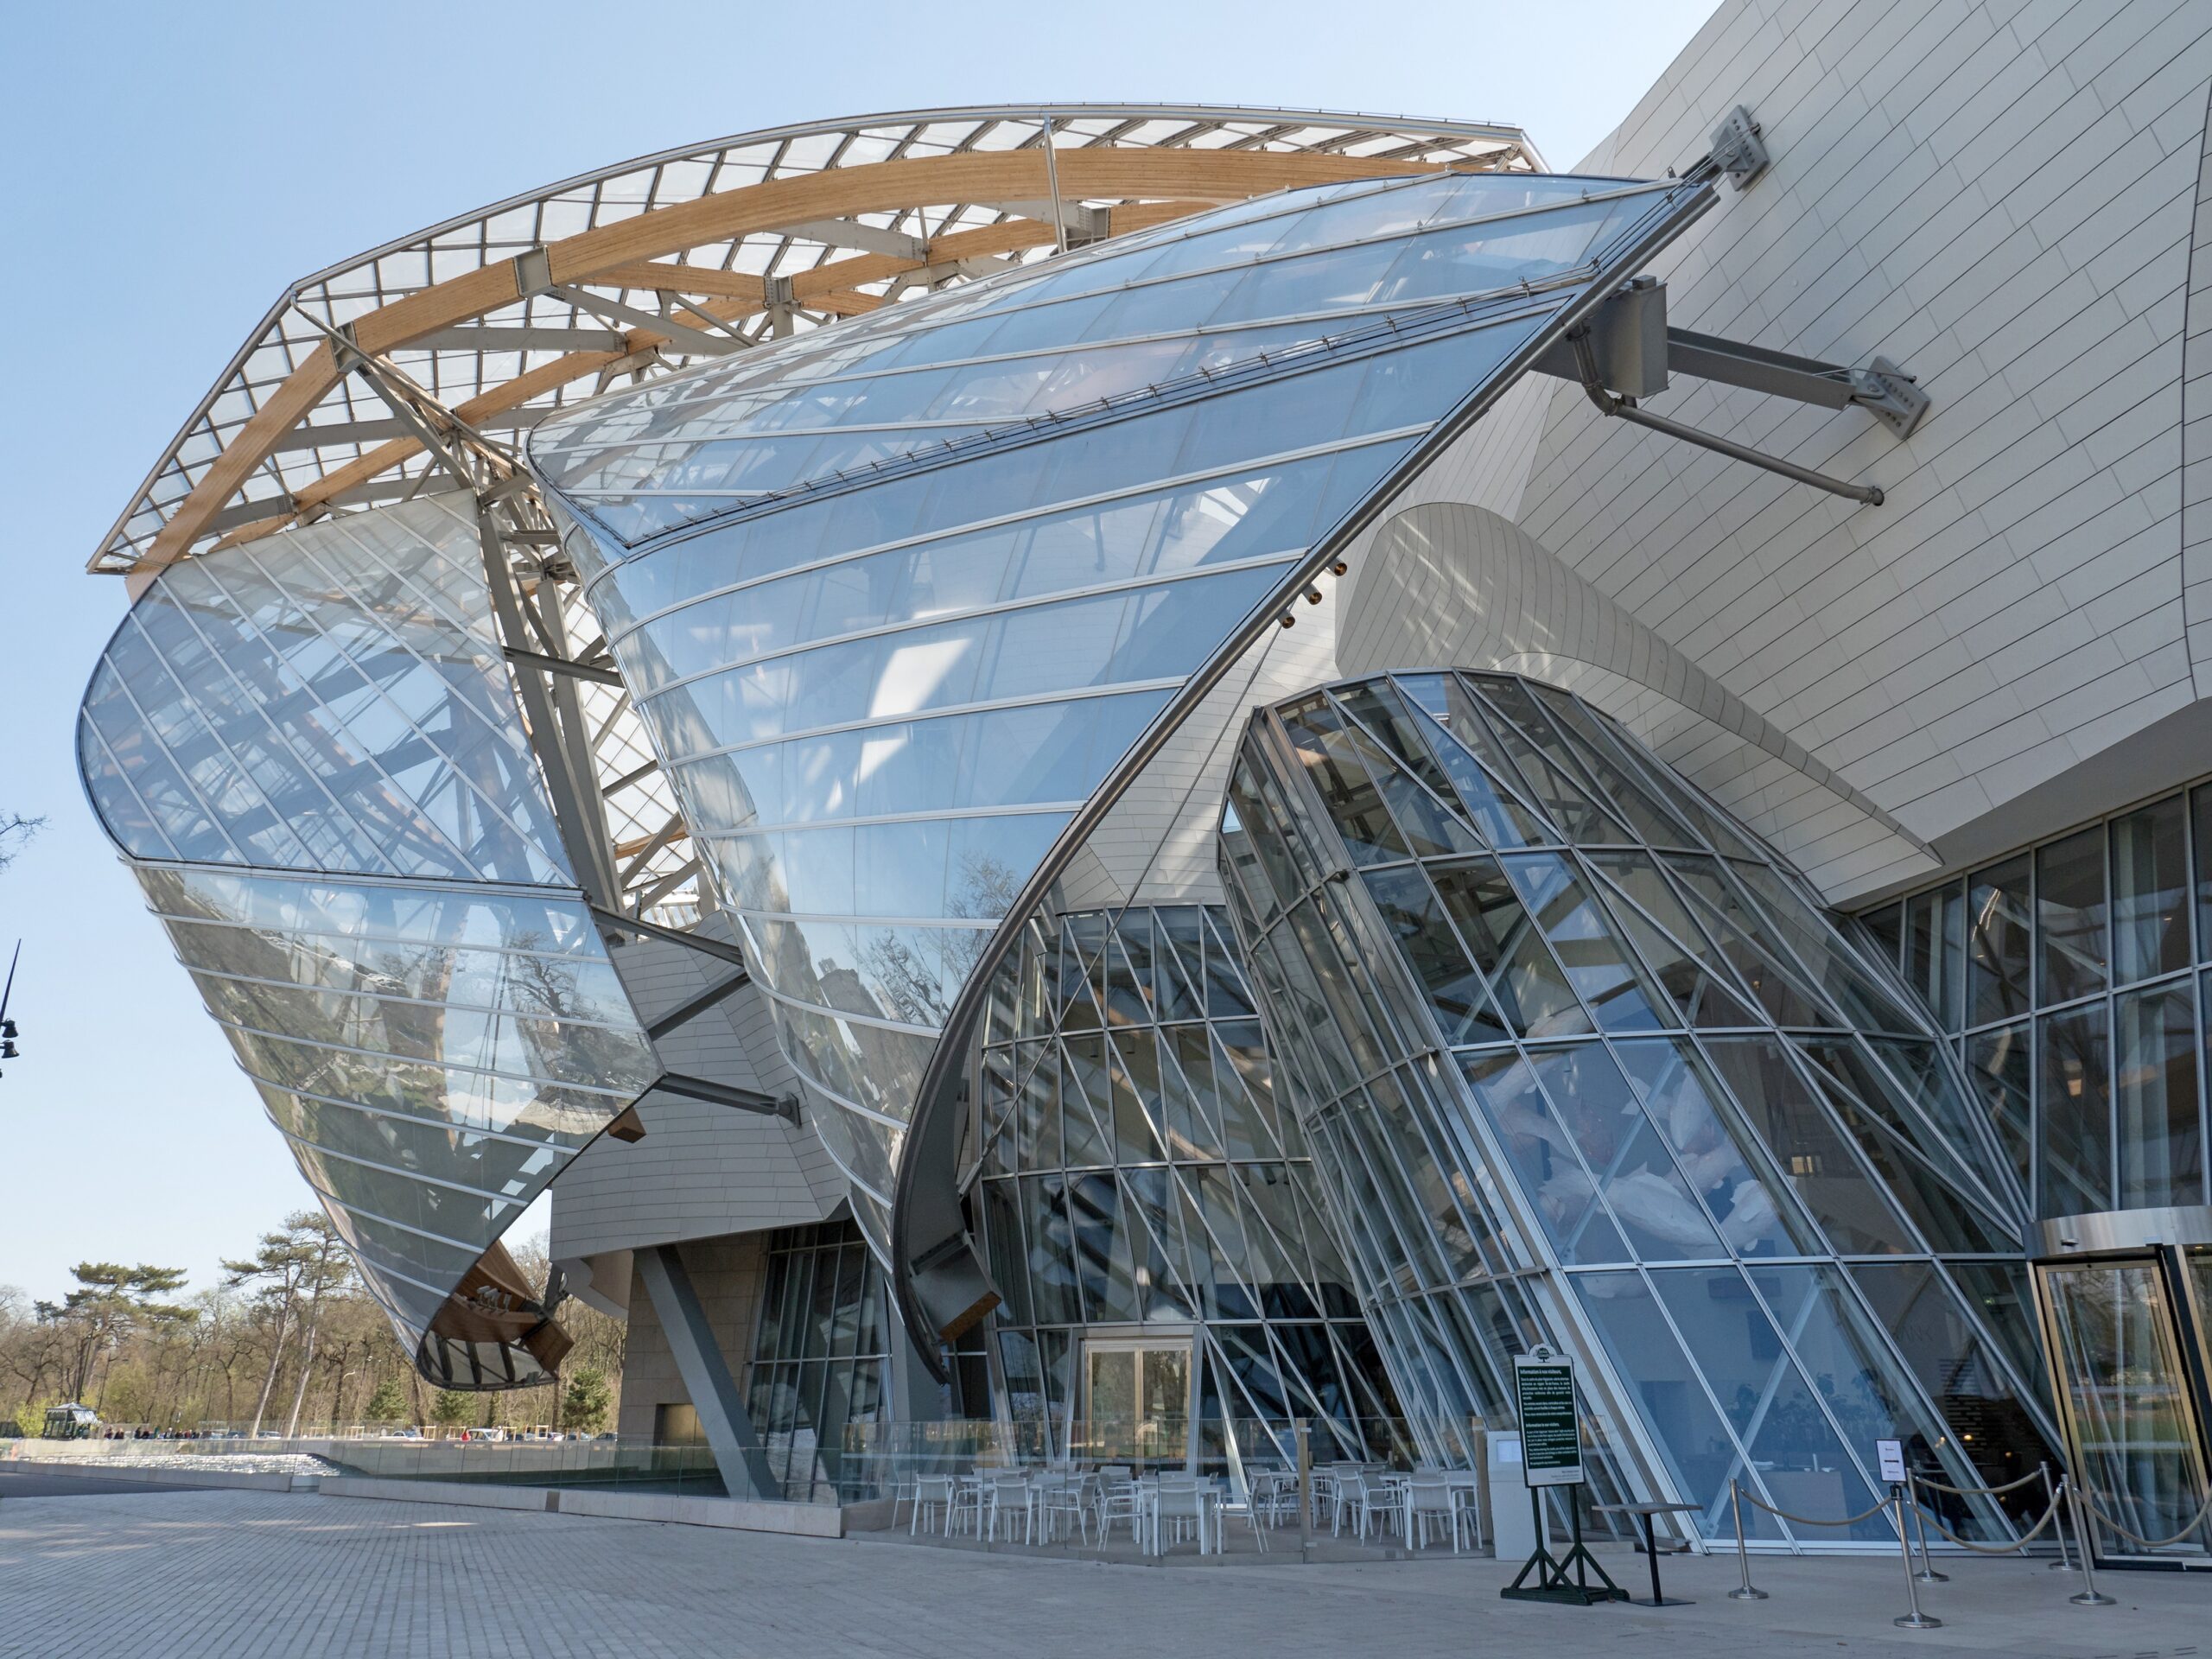 Guide To The Gehry-Designed Fondation Louis Vuitton In Paris - The